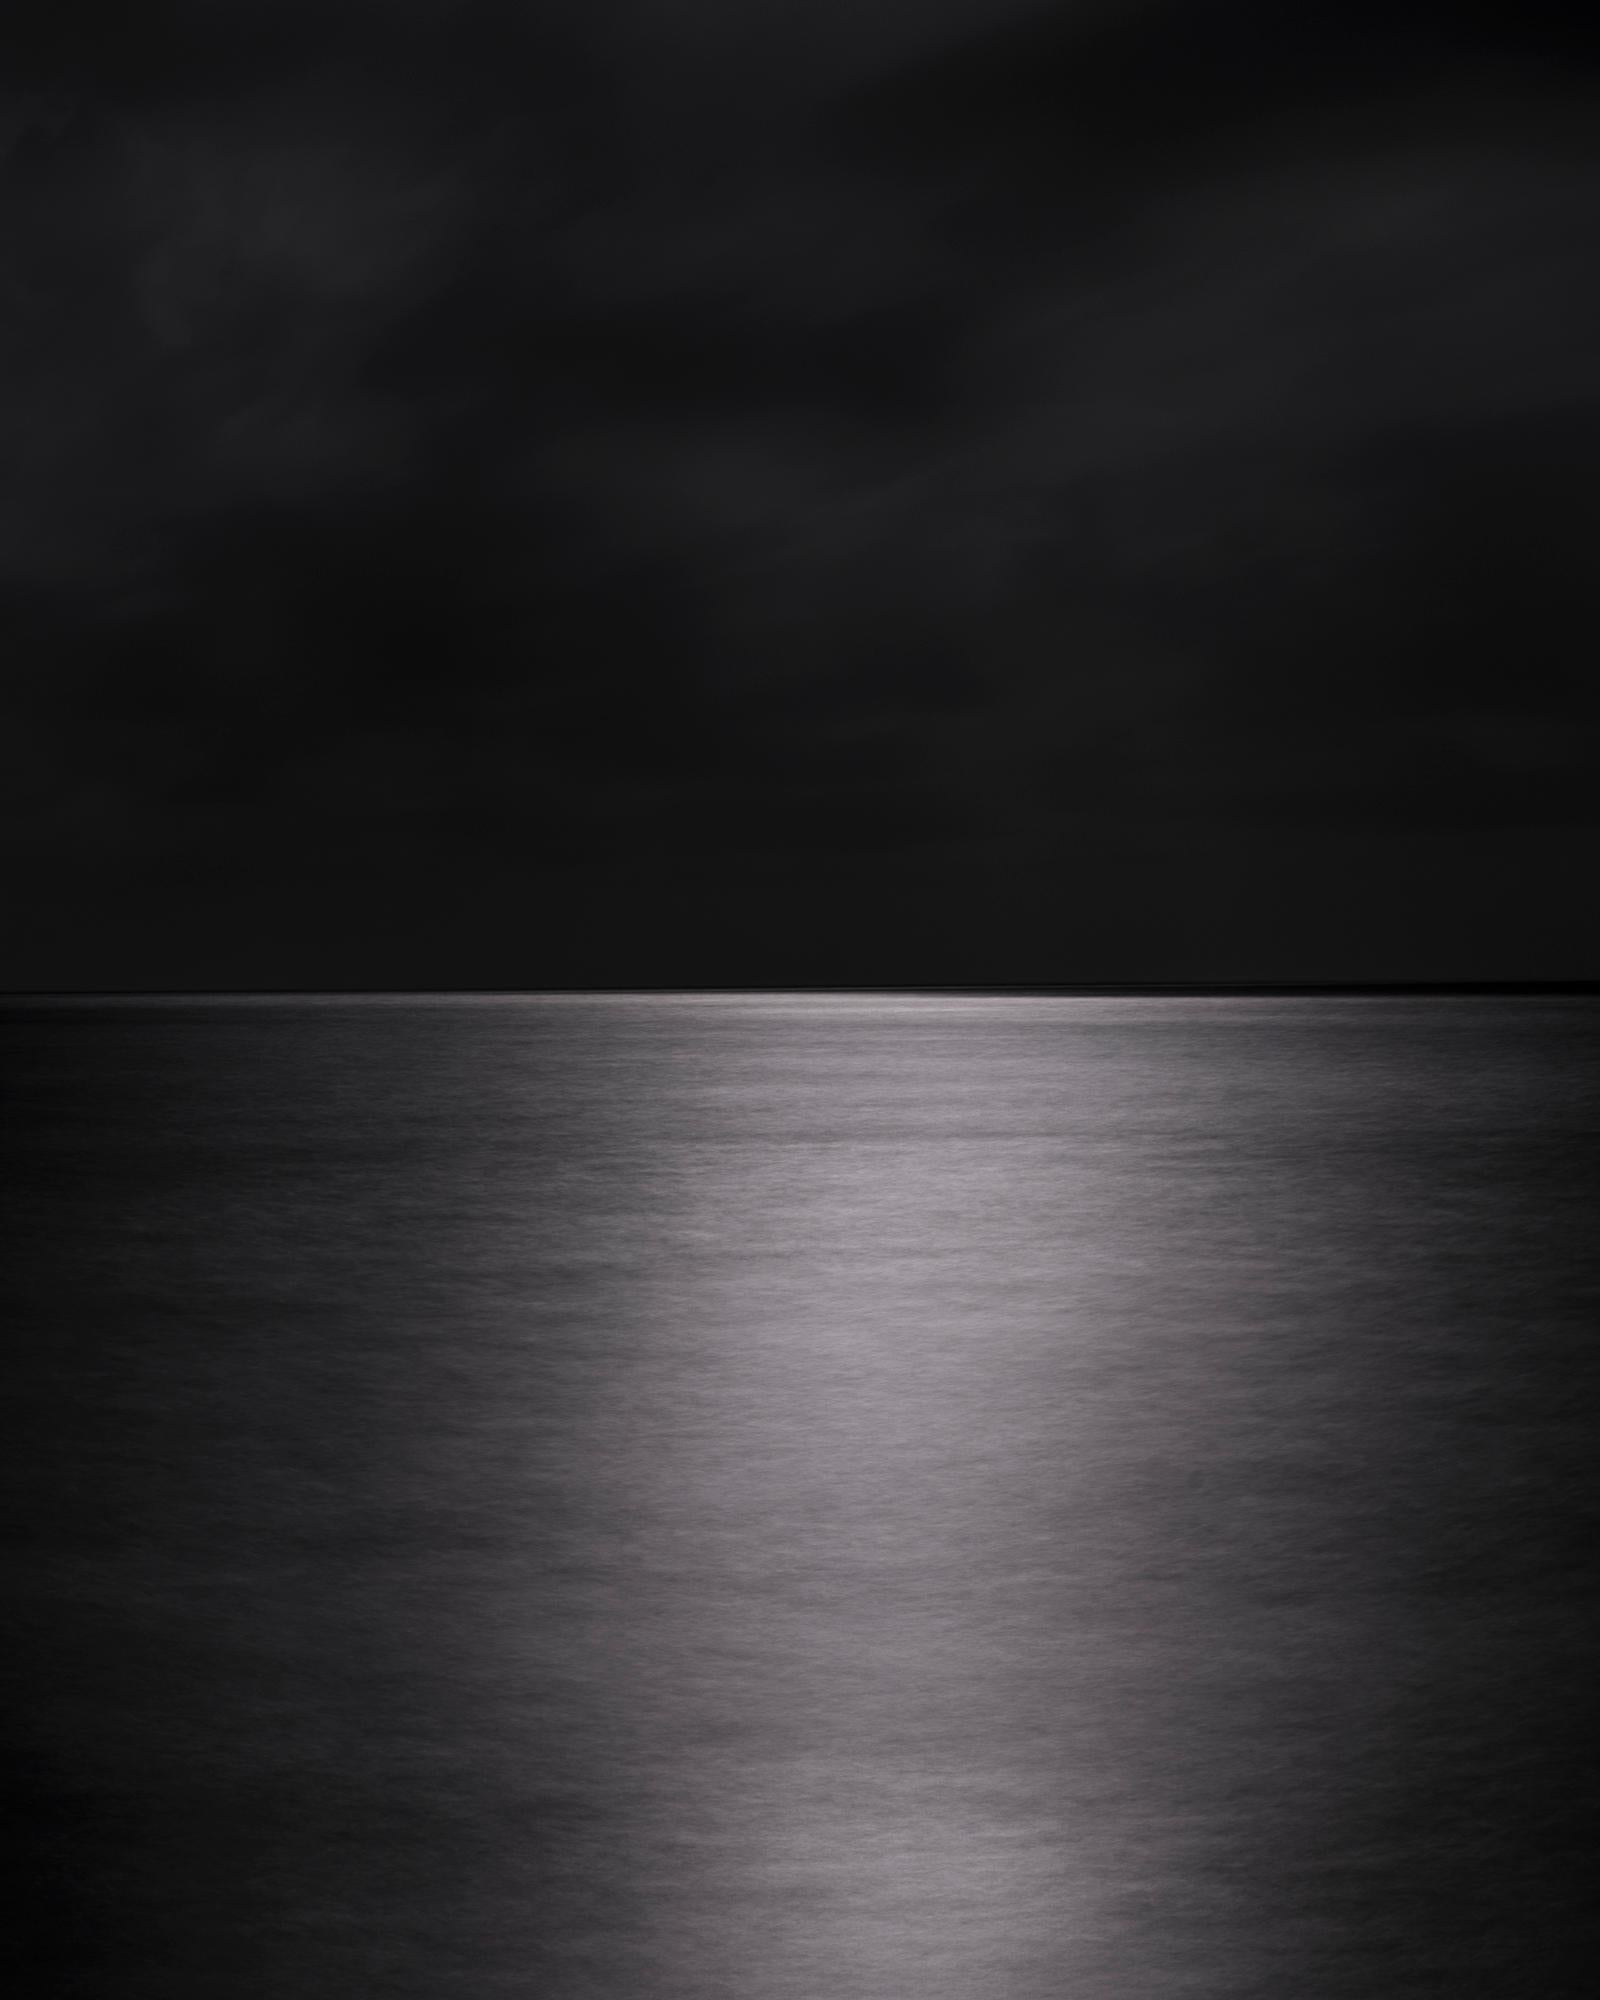 Set Sol de Mallorca, Moonrise II, I and IV, 2023 by Miguel Winograd 
From the Series Mares
Archival pigment print on fine art paper
Overall size: 43 in H x 144 in W 
Individual Size: 43 in H x 36 in W 
Edition of 7 + 2AP
Unframed